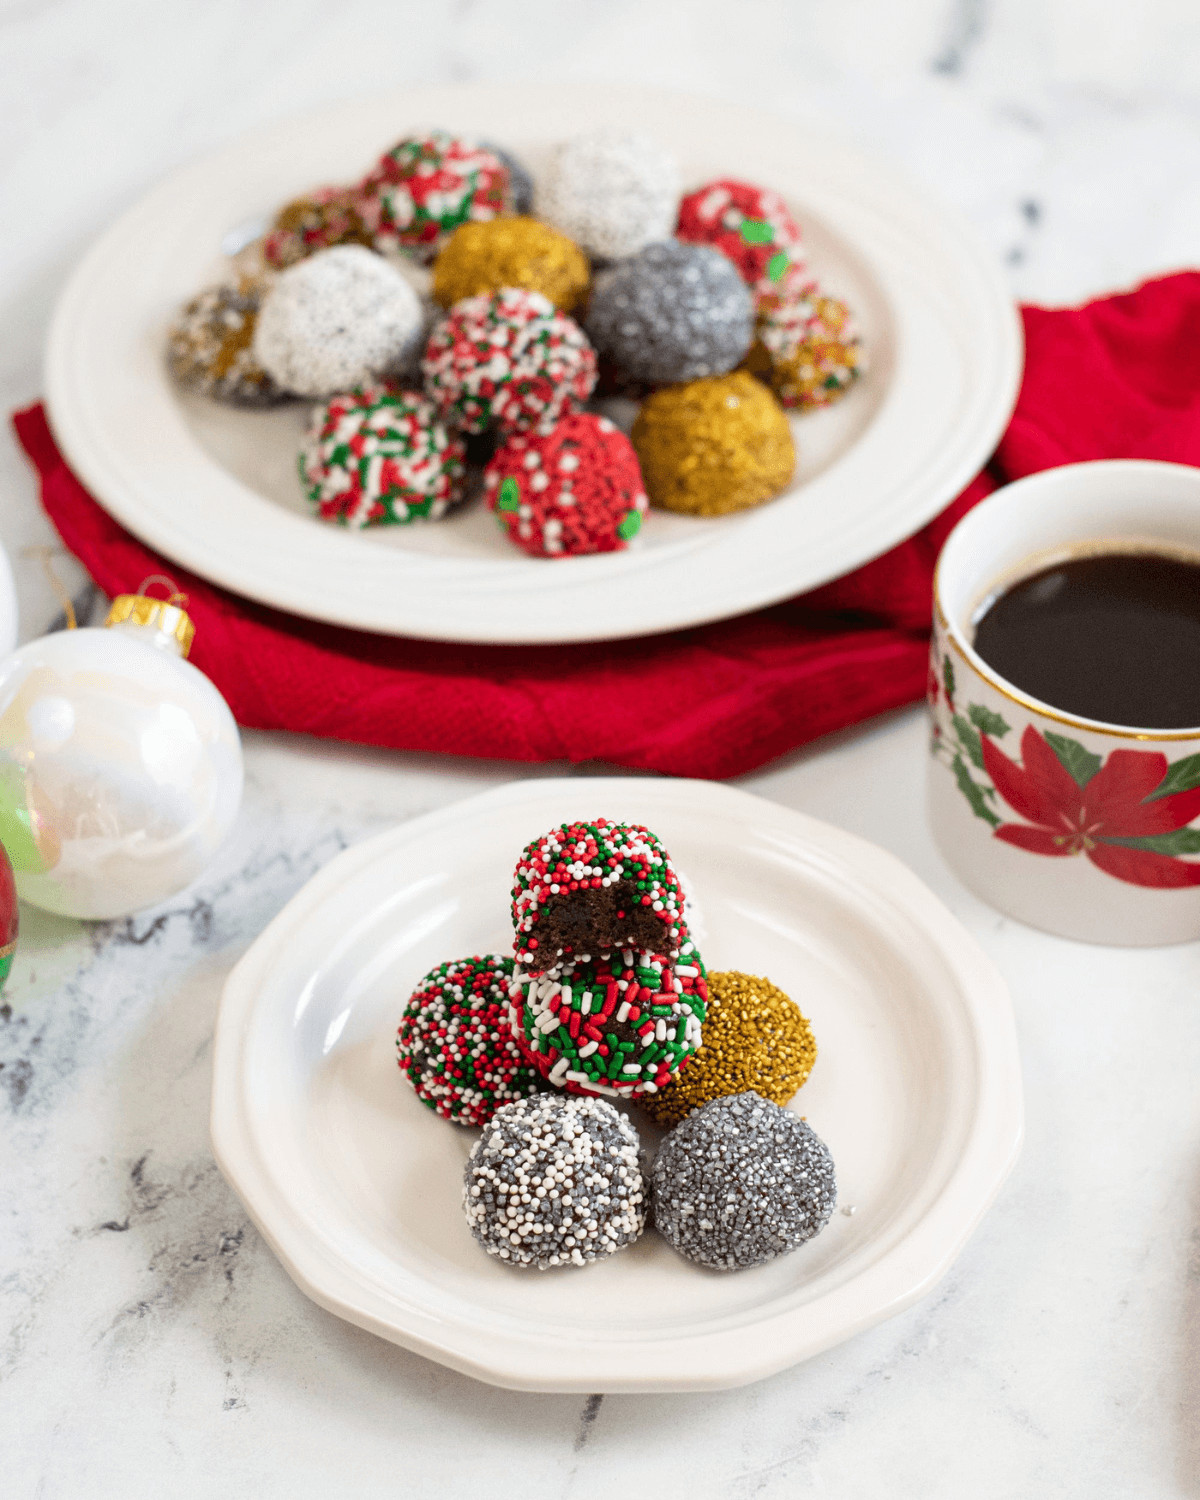 A platter and a serving of the Christmas brownie balls.